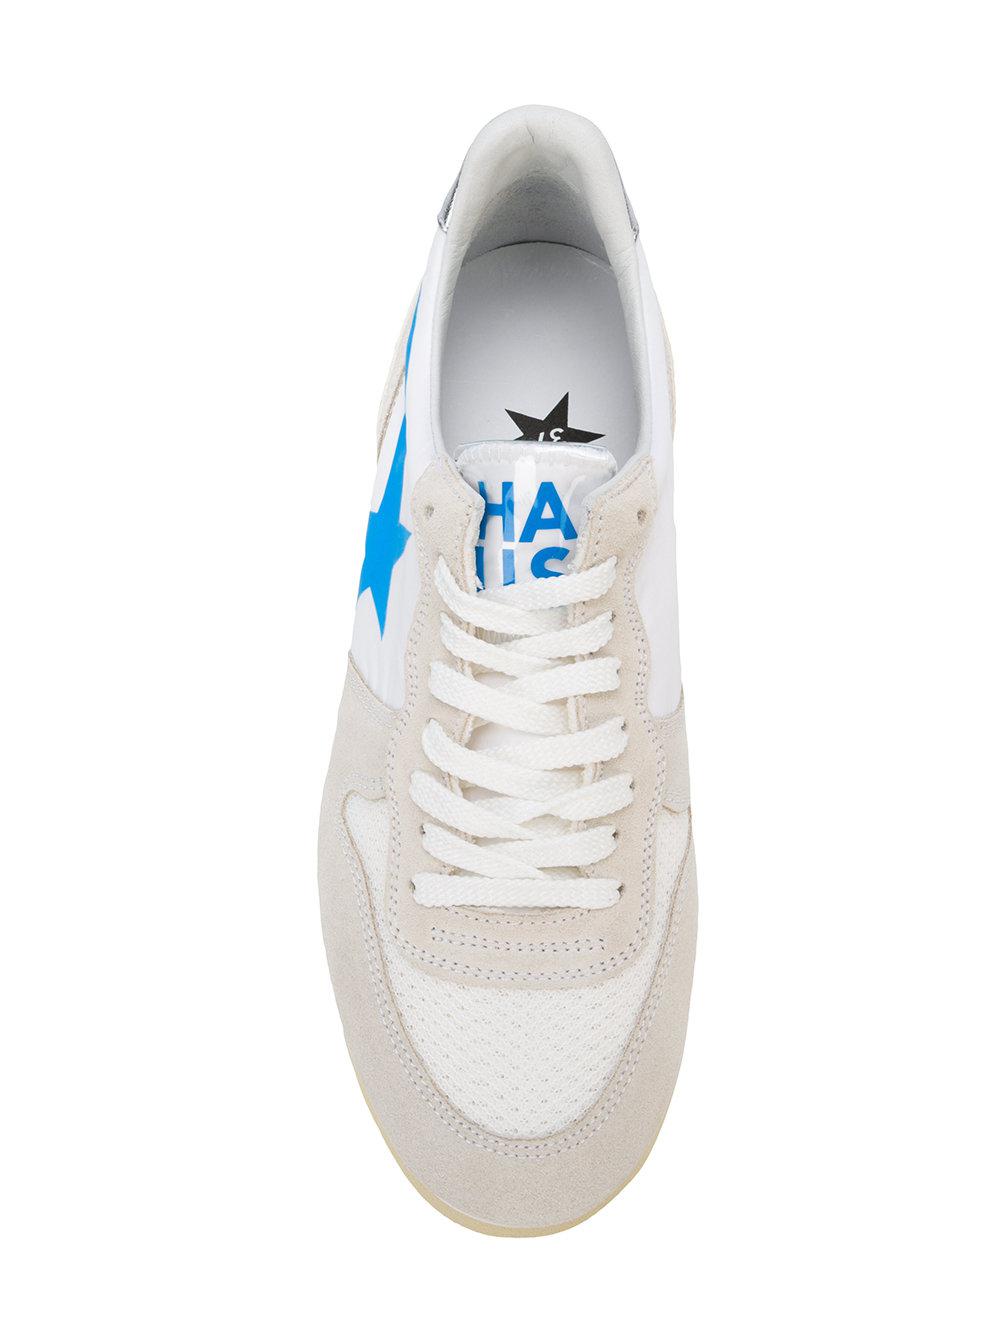 Haus By Golden Goose Deluxe Brand Leather Haus Swan Sneakers in White | Lyst